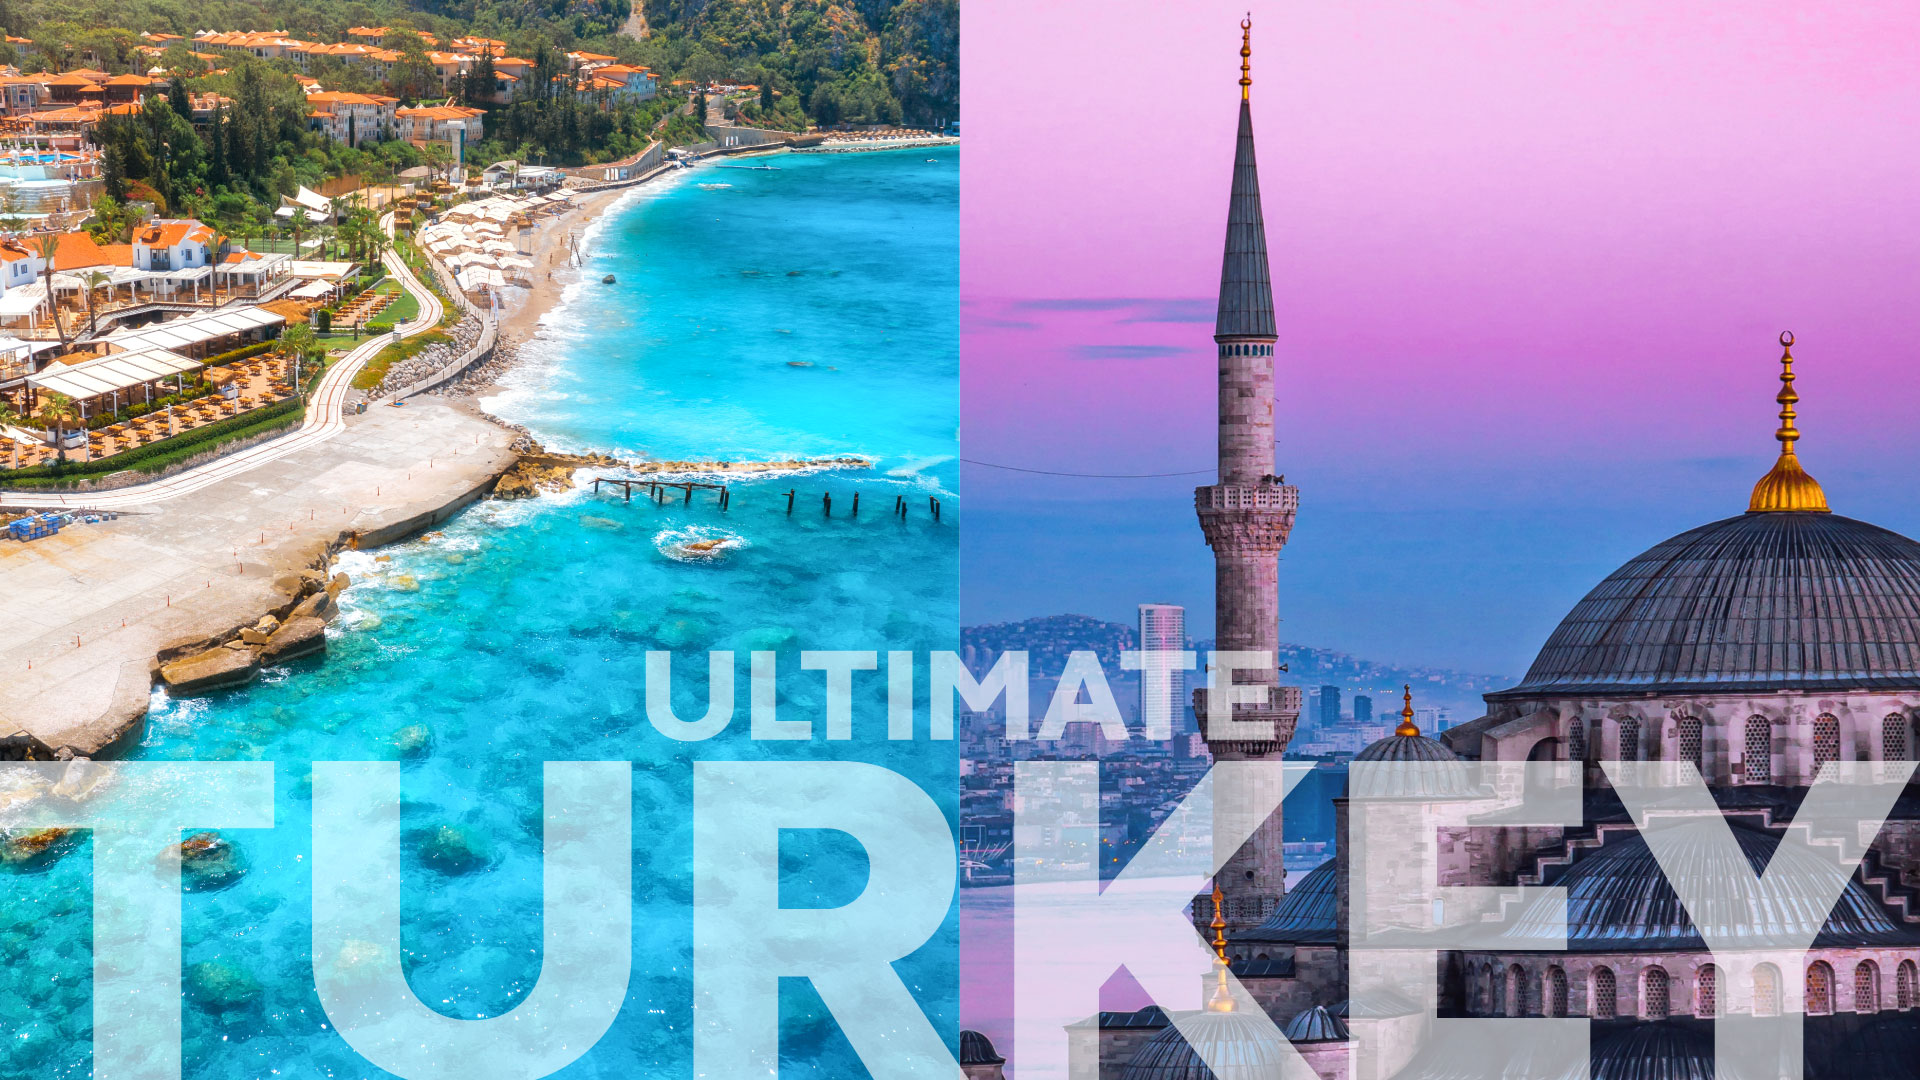 An images show two different cultural elements of Turkey, with the Hagia Sophia and a pristine coastline in Bodrum or Izmir - the image depicts Turkey as an ultimate destination